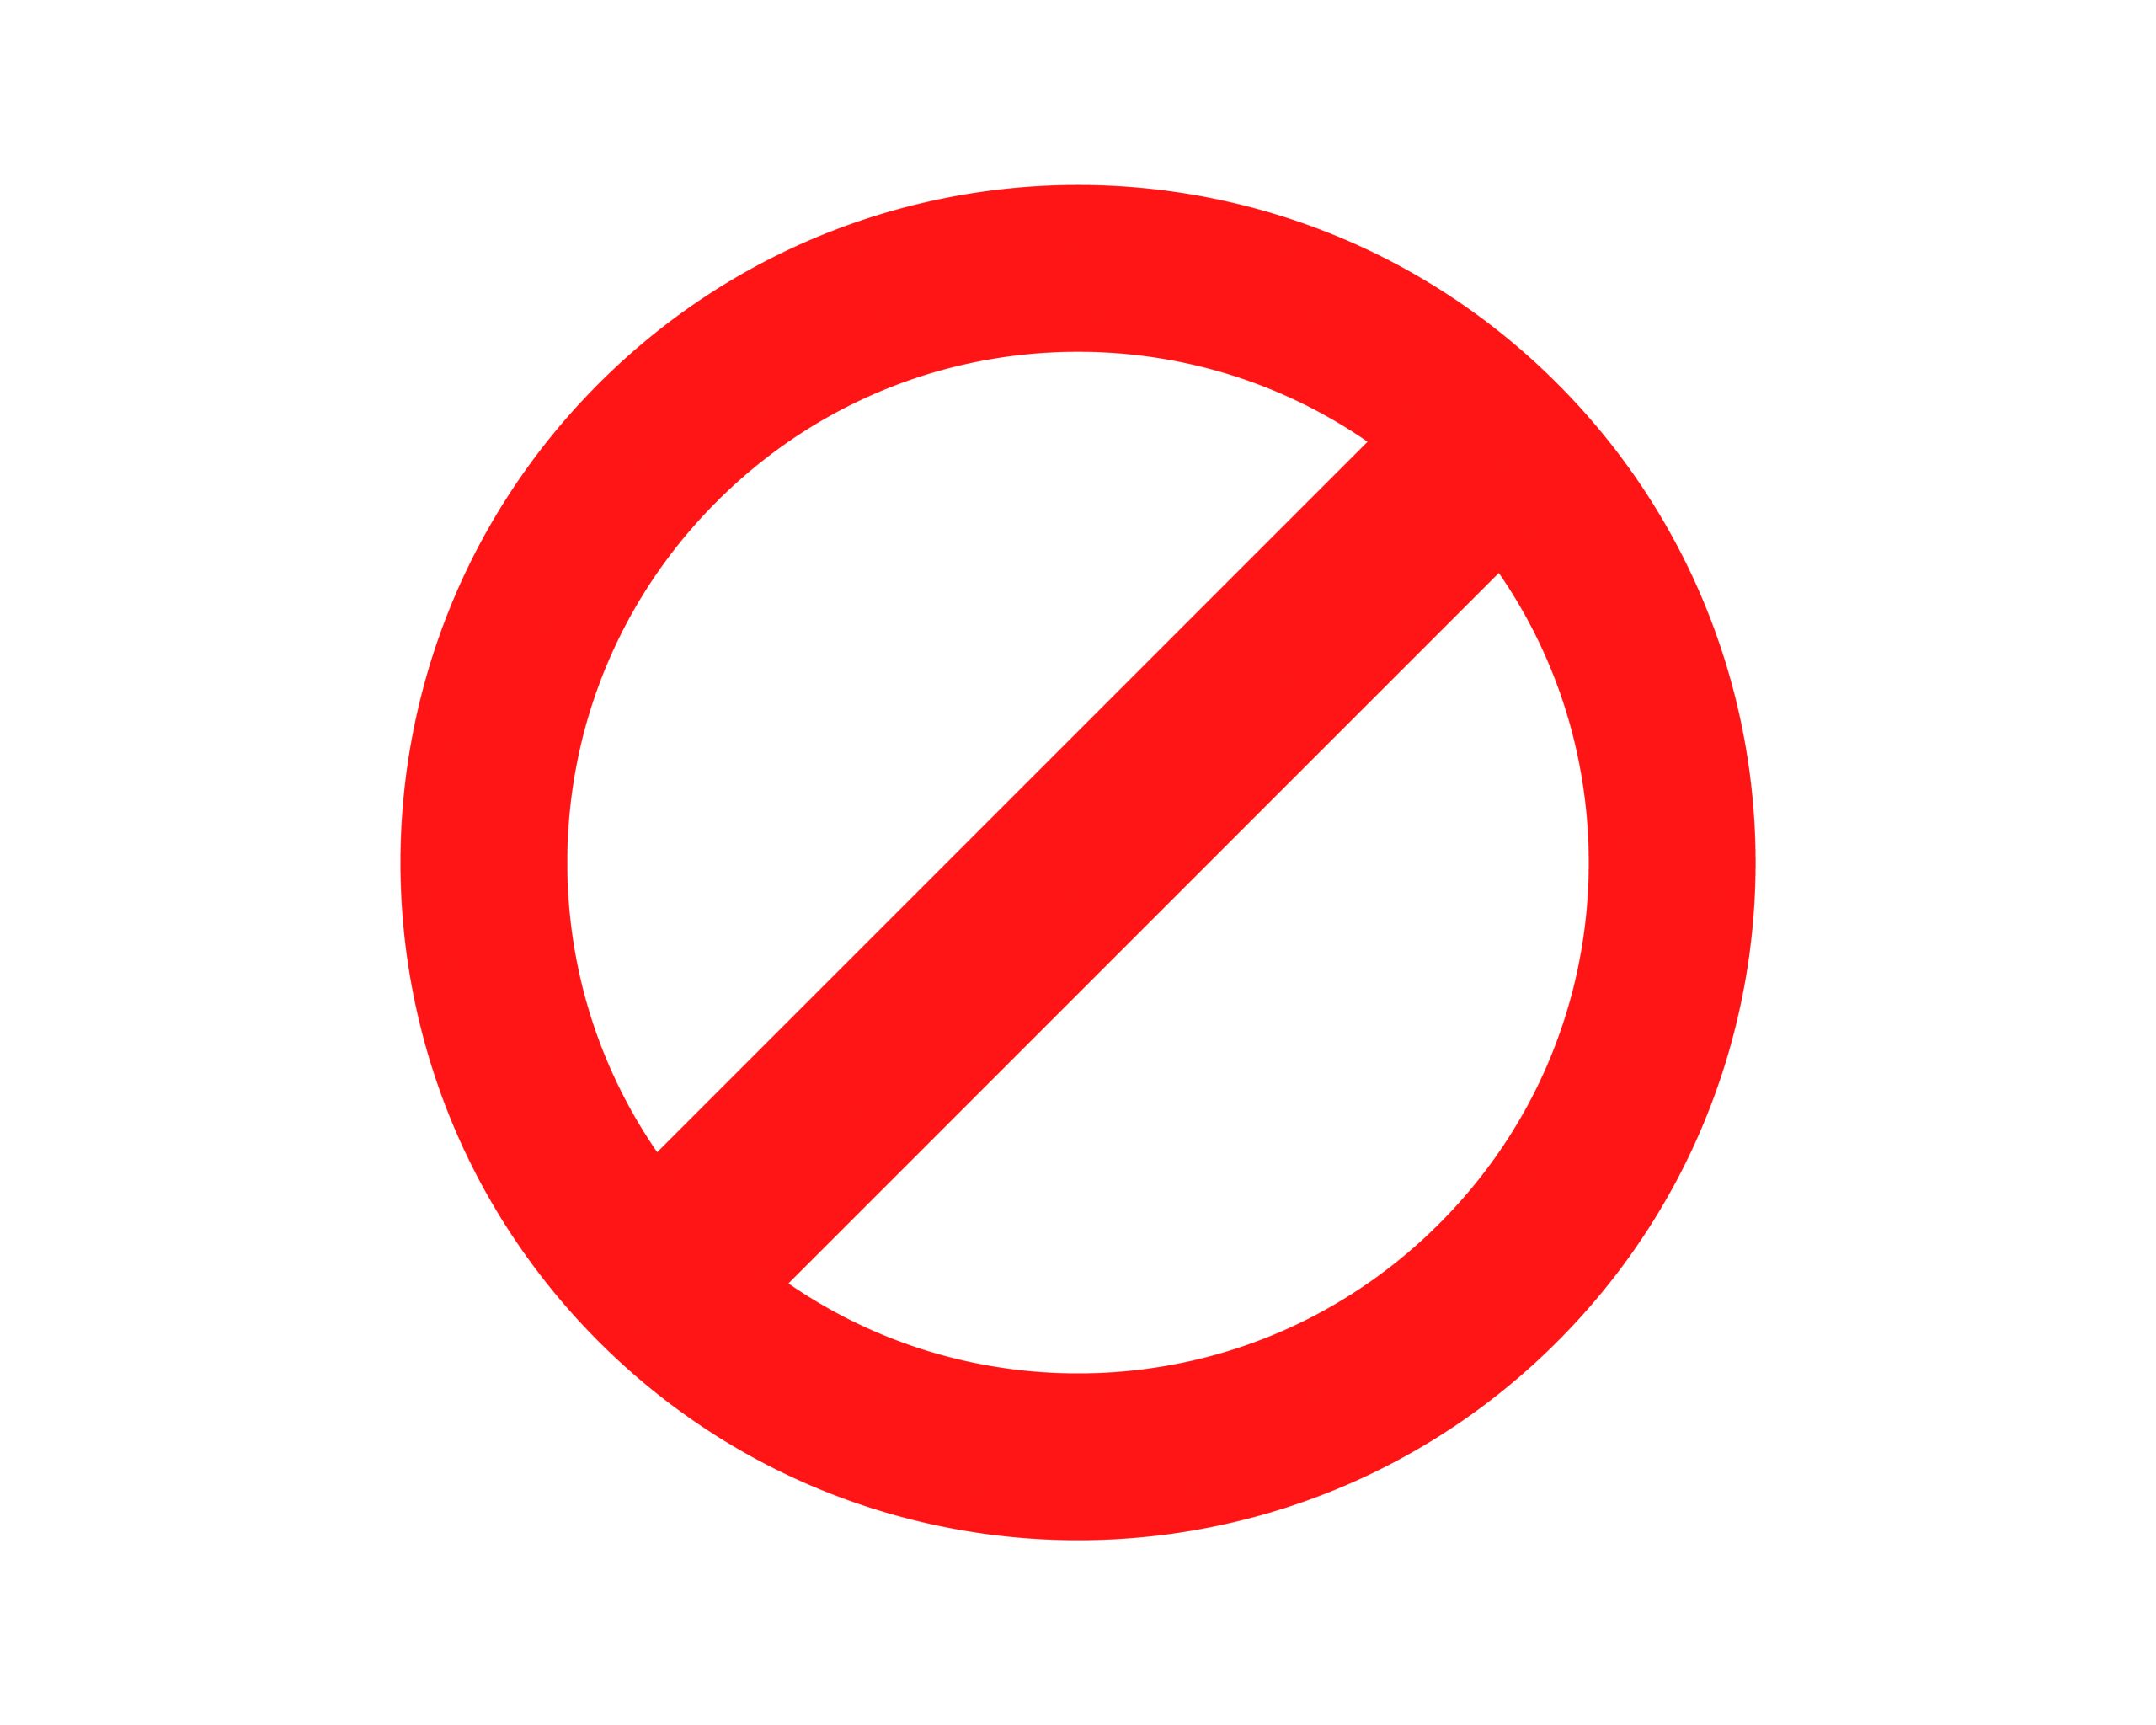 Vector illustration of a red prohibited sign without any icon, warning symbol, or stop symbol, isolated on a white background